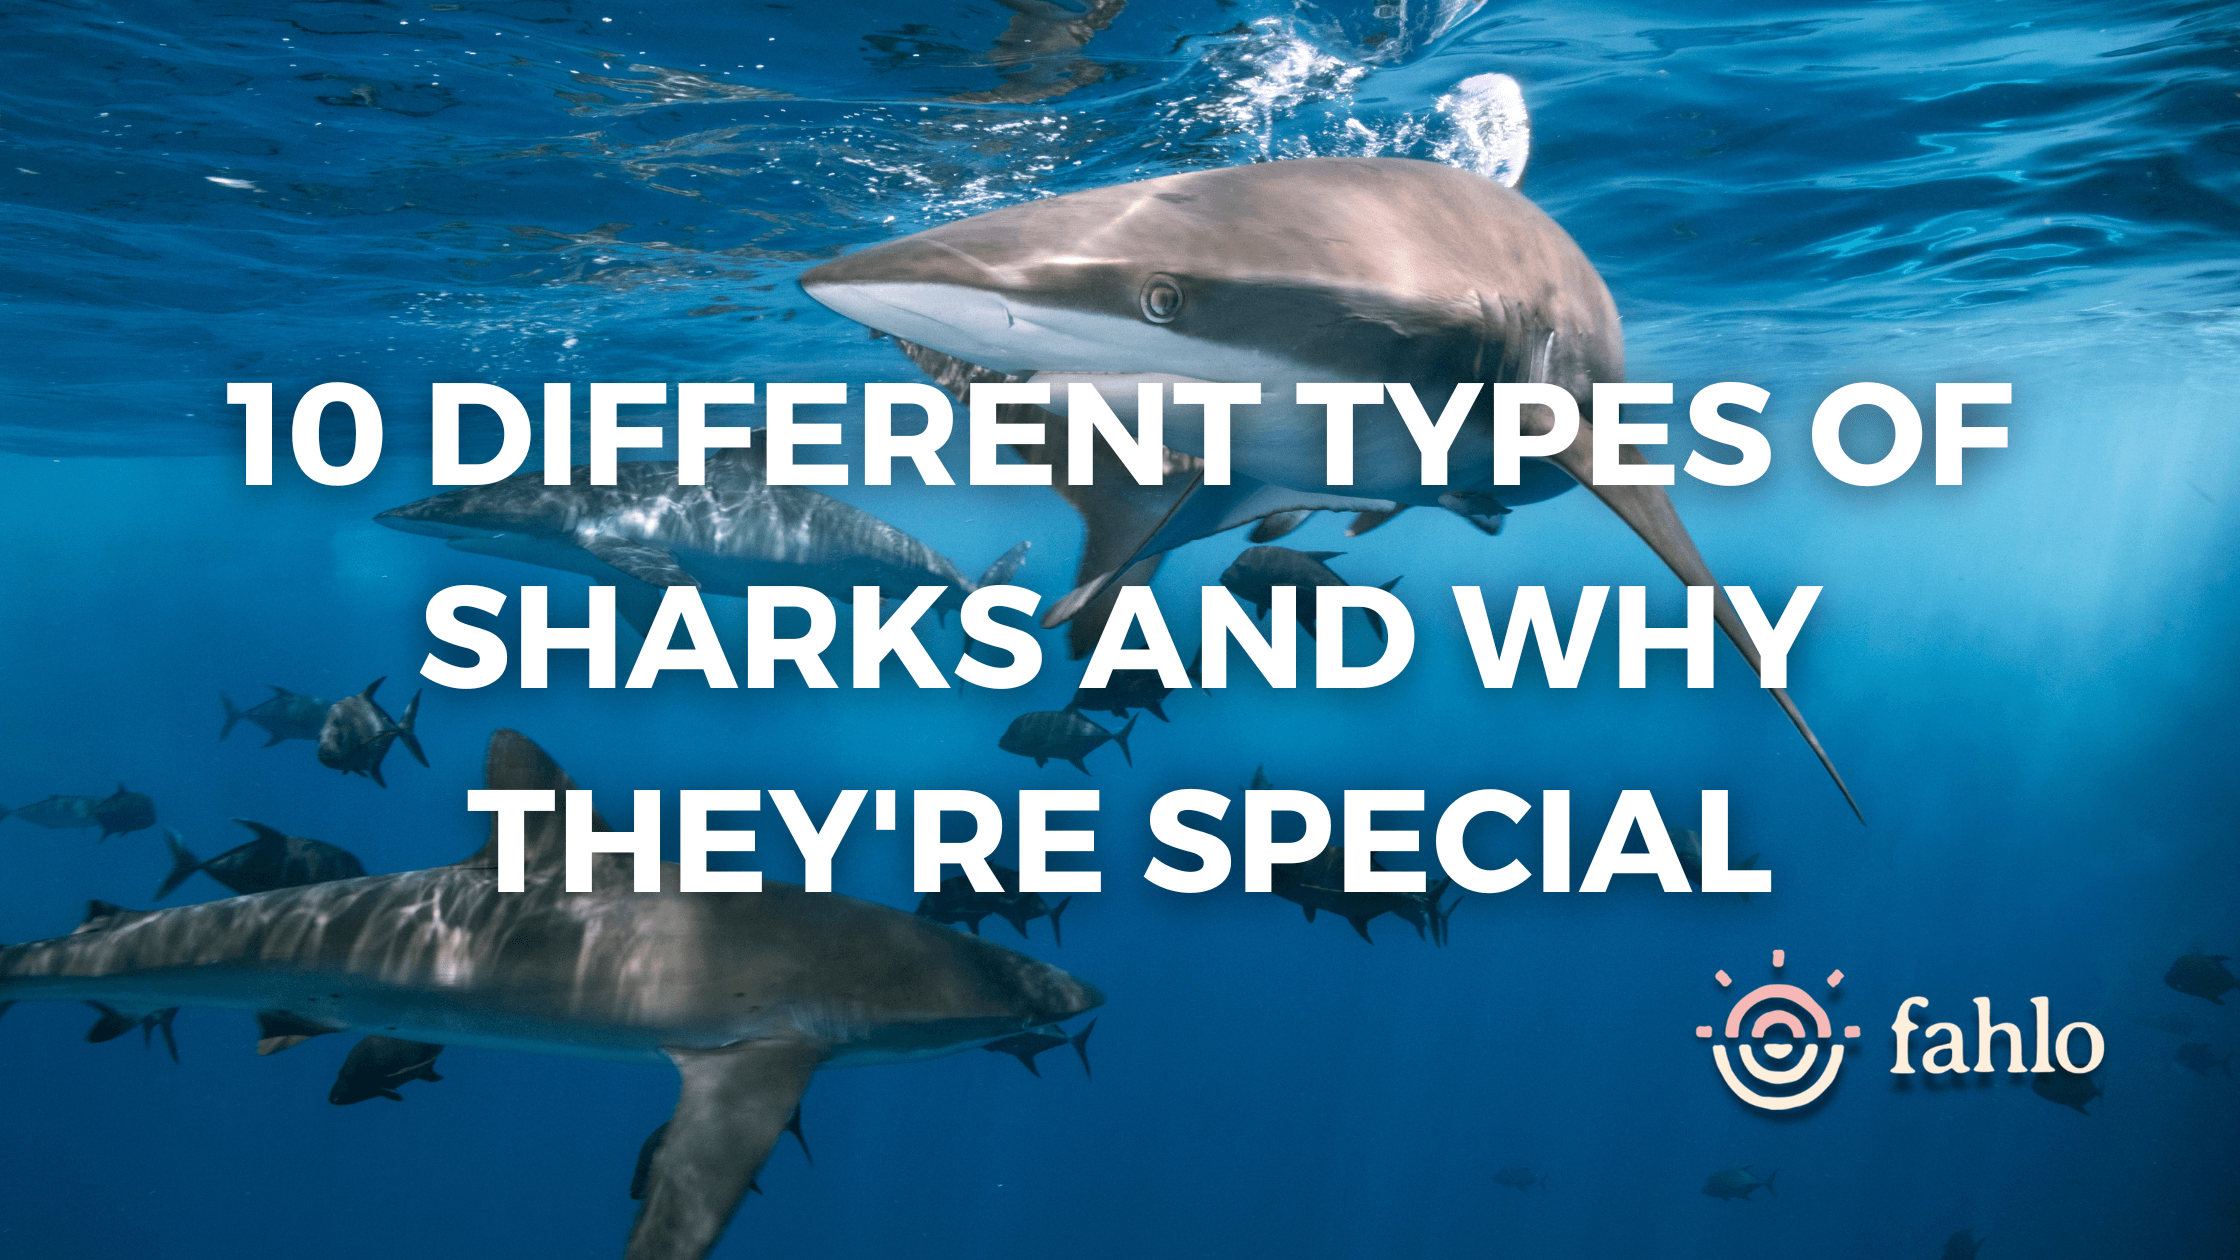 10 Different Types Of Sharks And Why They're Special | Fahlo